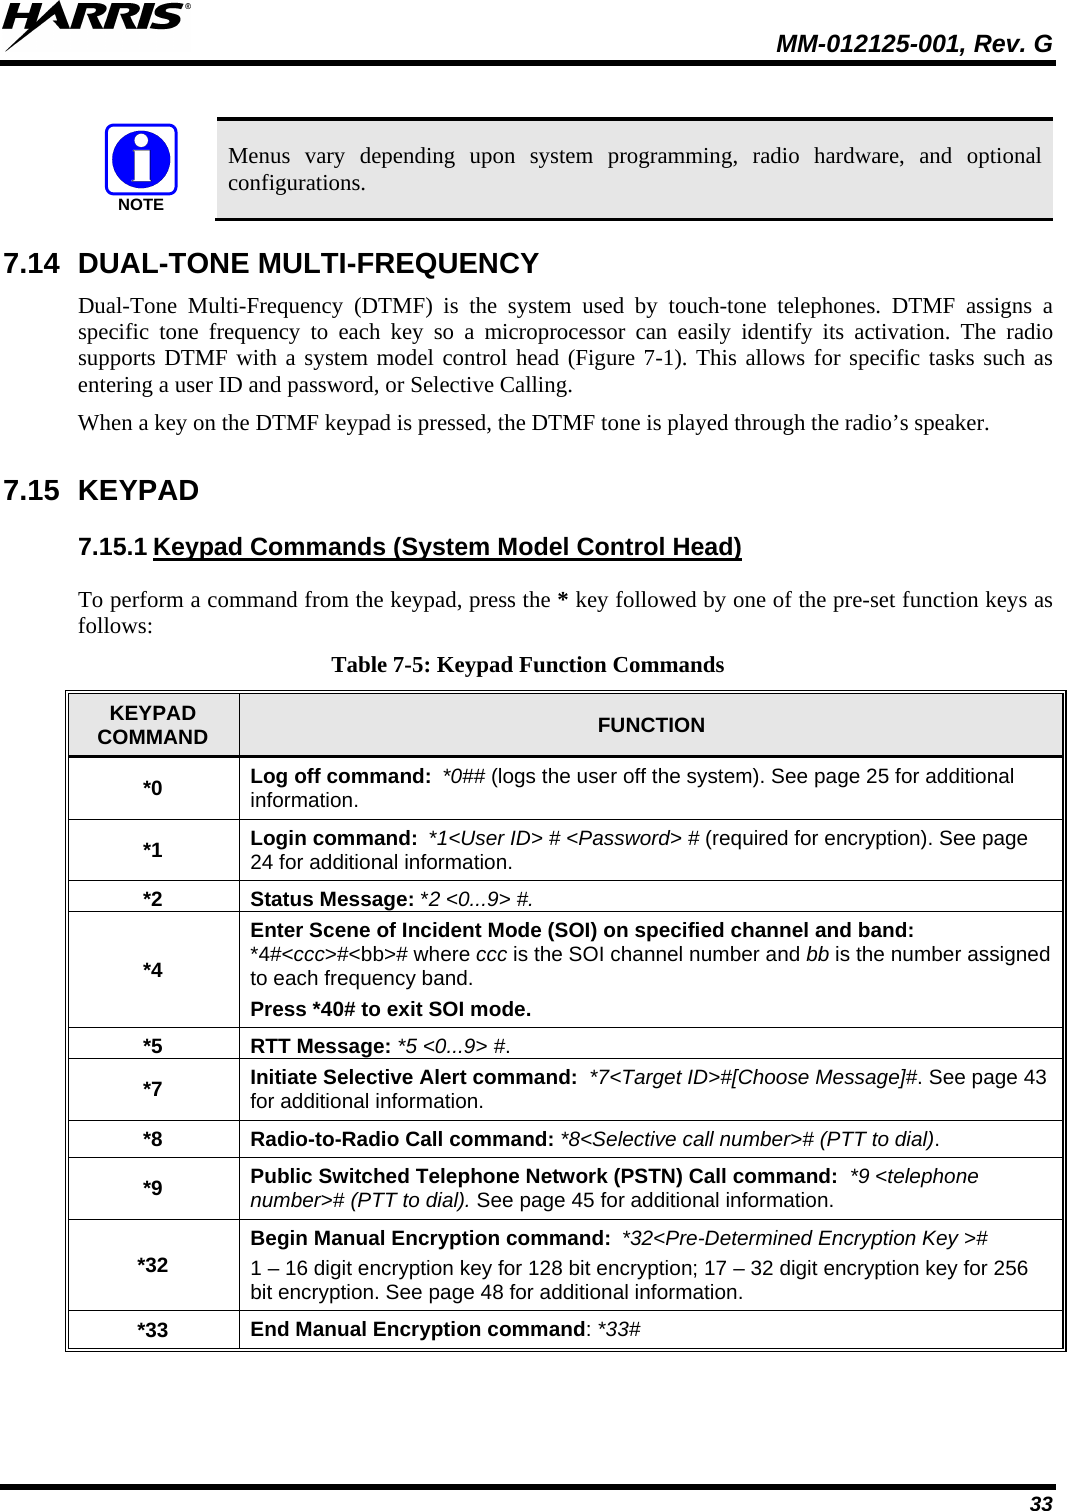  MM-012125-001, Rev. G 33  NOTE Menus vary depending upon system programming, radio hardware, and optional configurations.  7.14 DUAL-TONE MULTI-FREQUENCY Dual-Tone Multi-Frequency (DTMF) is the system used by touch-tone telephones. DTMF assigns a specific tone frequency to each key so a microprocessor can easily identify its activation. The radio supports DTMF with a system model control head (Figure 7-1). This allows for specific tasks such as entering a user ID and password, or Selective Calling. When a key on the DTMF keypad is pressed, the DTMF tone is played through the radio’s speaker. 7.15 KEYPAD 7.15.1 To perform a command from the keypad, press the * key followed by one of the pre-set function keys as follows: Keypad Commands (System Model Control Head) Table 7-5: Keypad Function Commands KEYPAD COMMAND FUNCTION *0 Log off command: *0## (logs the user off the system). See page 25 for additional information. *1 Login command: *1&lt;User ID&gt; # &lt;Password&gt; # (required for encryption). See page 24 for additional information. *2 Status Message: *2 &lt;0...9&gt; #. *4 Enter Scene of Incident Mode (SOI) on specified channel and band: *4#&lt;ccc&gt;#&lt;bb&gt;# where ccc is the SOI channel number and bb is the number assigned to each frequency band.  Press *40# to exit SOI mode. *5 RTT Message: *5 &lt;0...9&gt; #.  *7 Initiate Selective Alert command:  *7&lt;Target ID&gt;#[Choose Message]#. See page 43 for additional information. *8 Radio-to-Radio Call command: *8&lt;Selective call number&gt;# (PTT to dial).  *9 Public Switched Telephone Network (PSTN) Call command:  *9 &lt;telephone number&gt;# (PTT to dial). See page 45 for additional information. *32 Begin Manual Encryption command: *32&lt;Pre-Determined Encryption Key &gt;#  1 – 16 digit encryption key for 128 bit encryption; 17 – 32 digit encryption key for 256 bit encryption. See page 48 for additional information. *33 End Manual Encryption command: *33# 